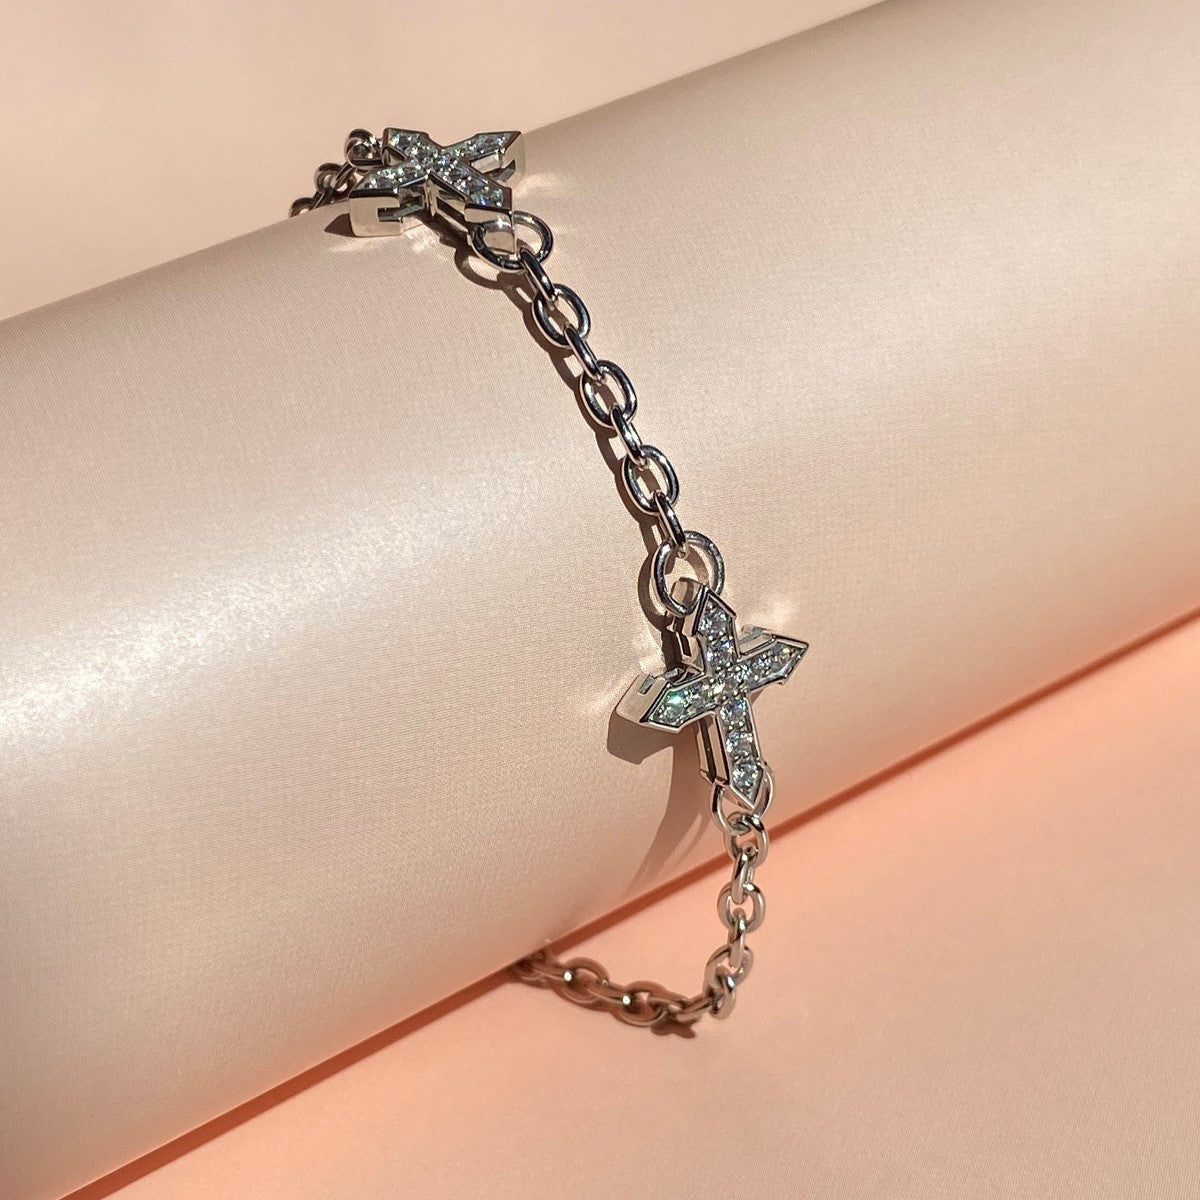 CHAIN BRACELET "TWO CROSSES "GLOW" WITH MOISSANITE / SILVER